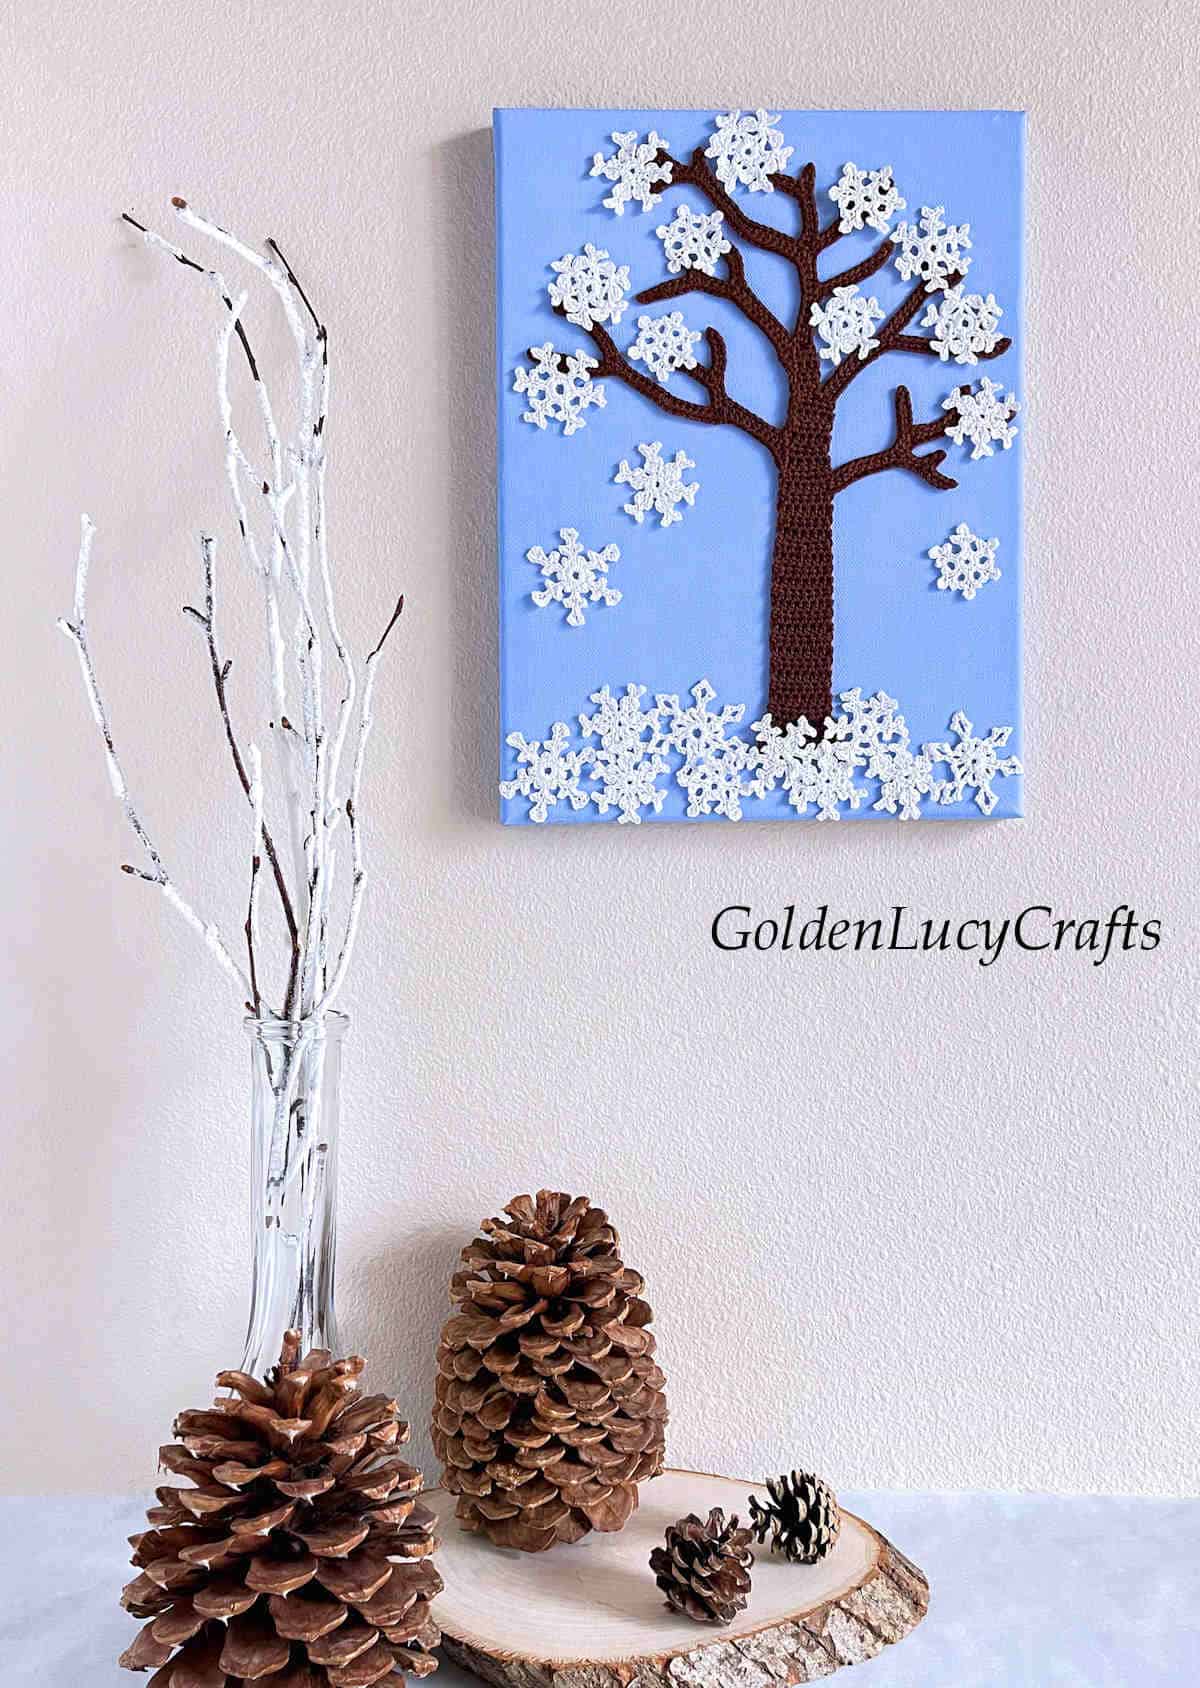 Crochet winter tree on canvas hanging on the wall.